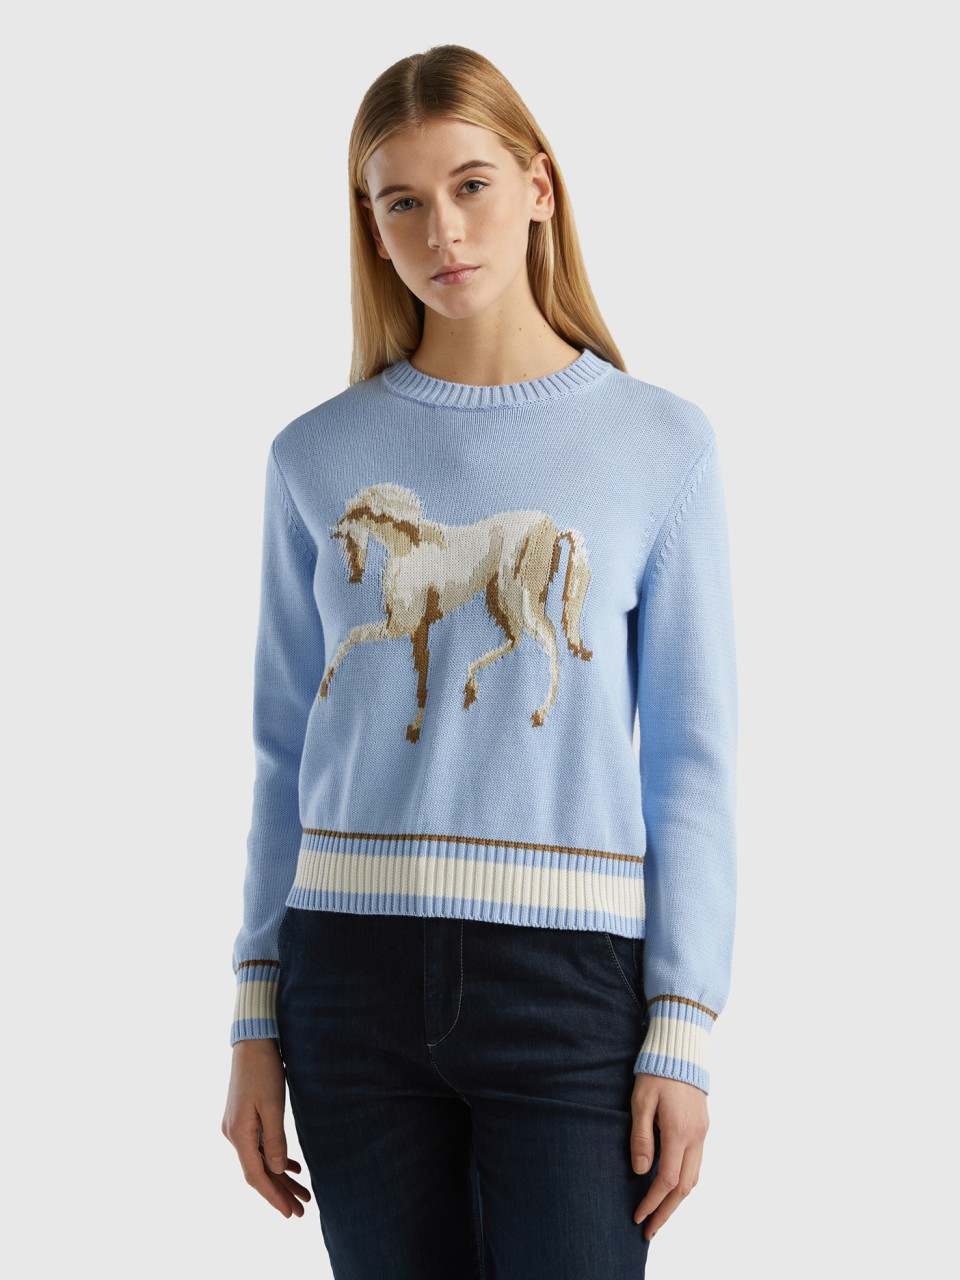 Benetton, Sweater With Horse Inlay, Sky Blue, Women